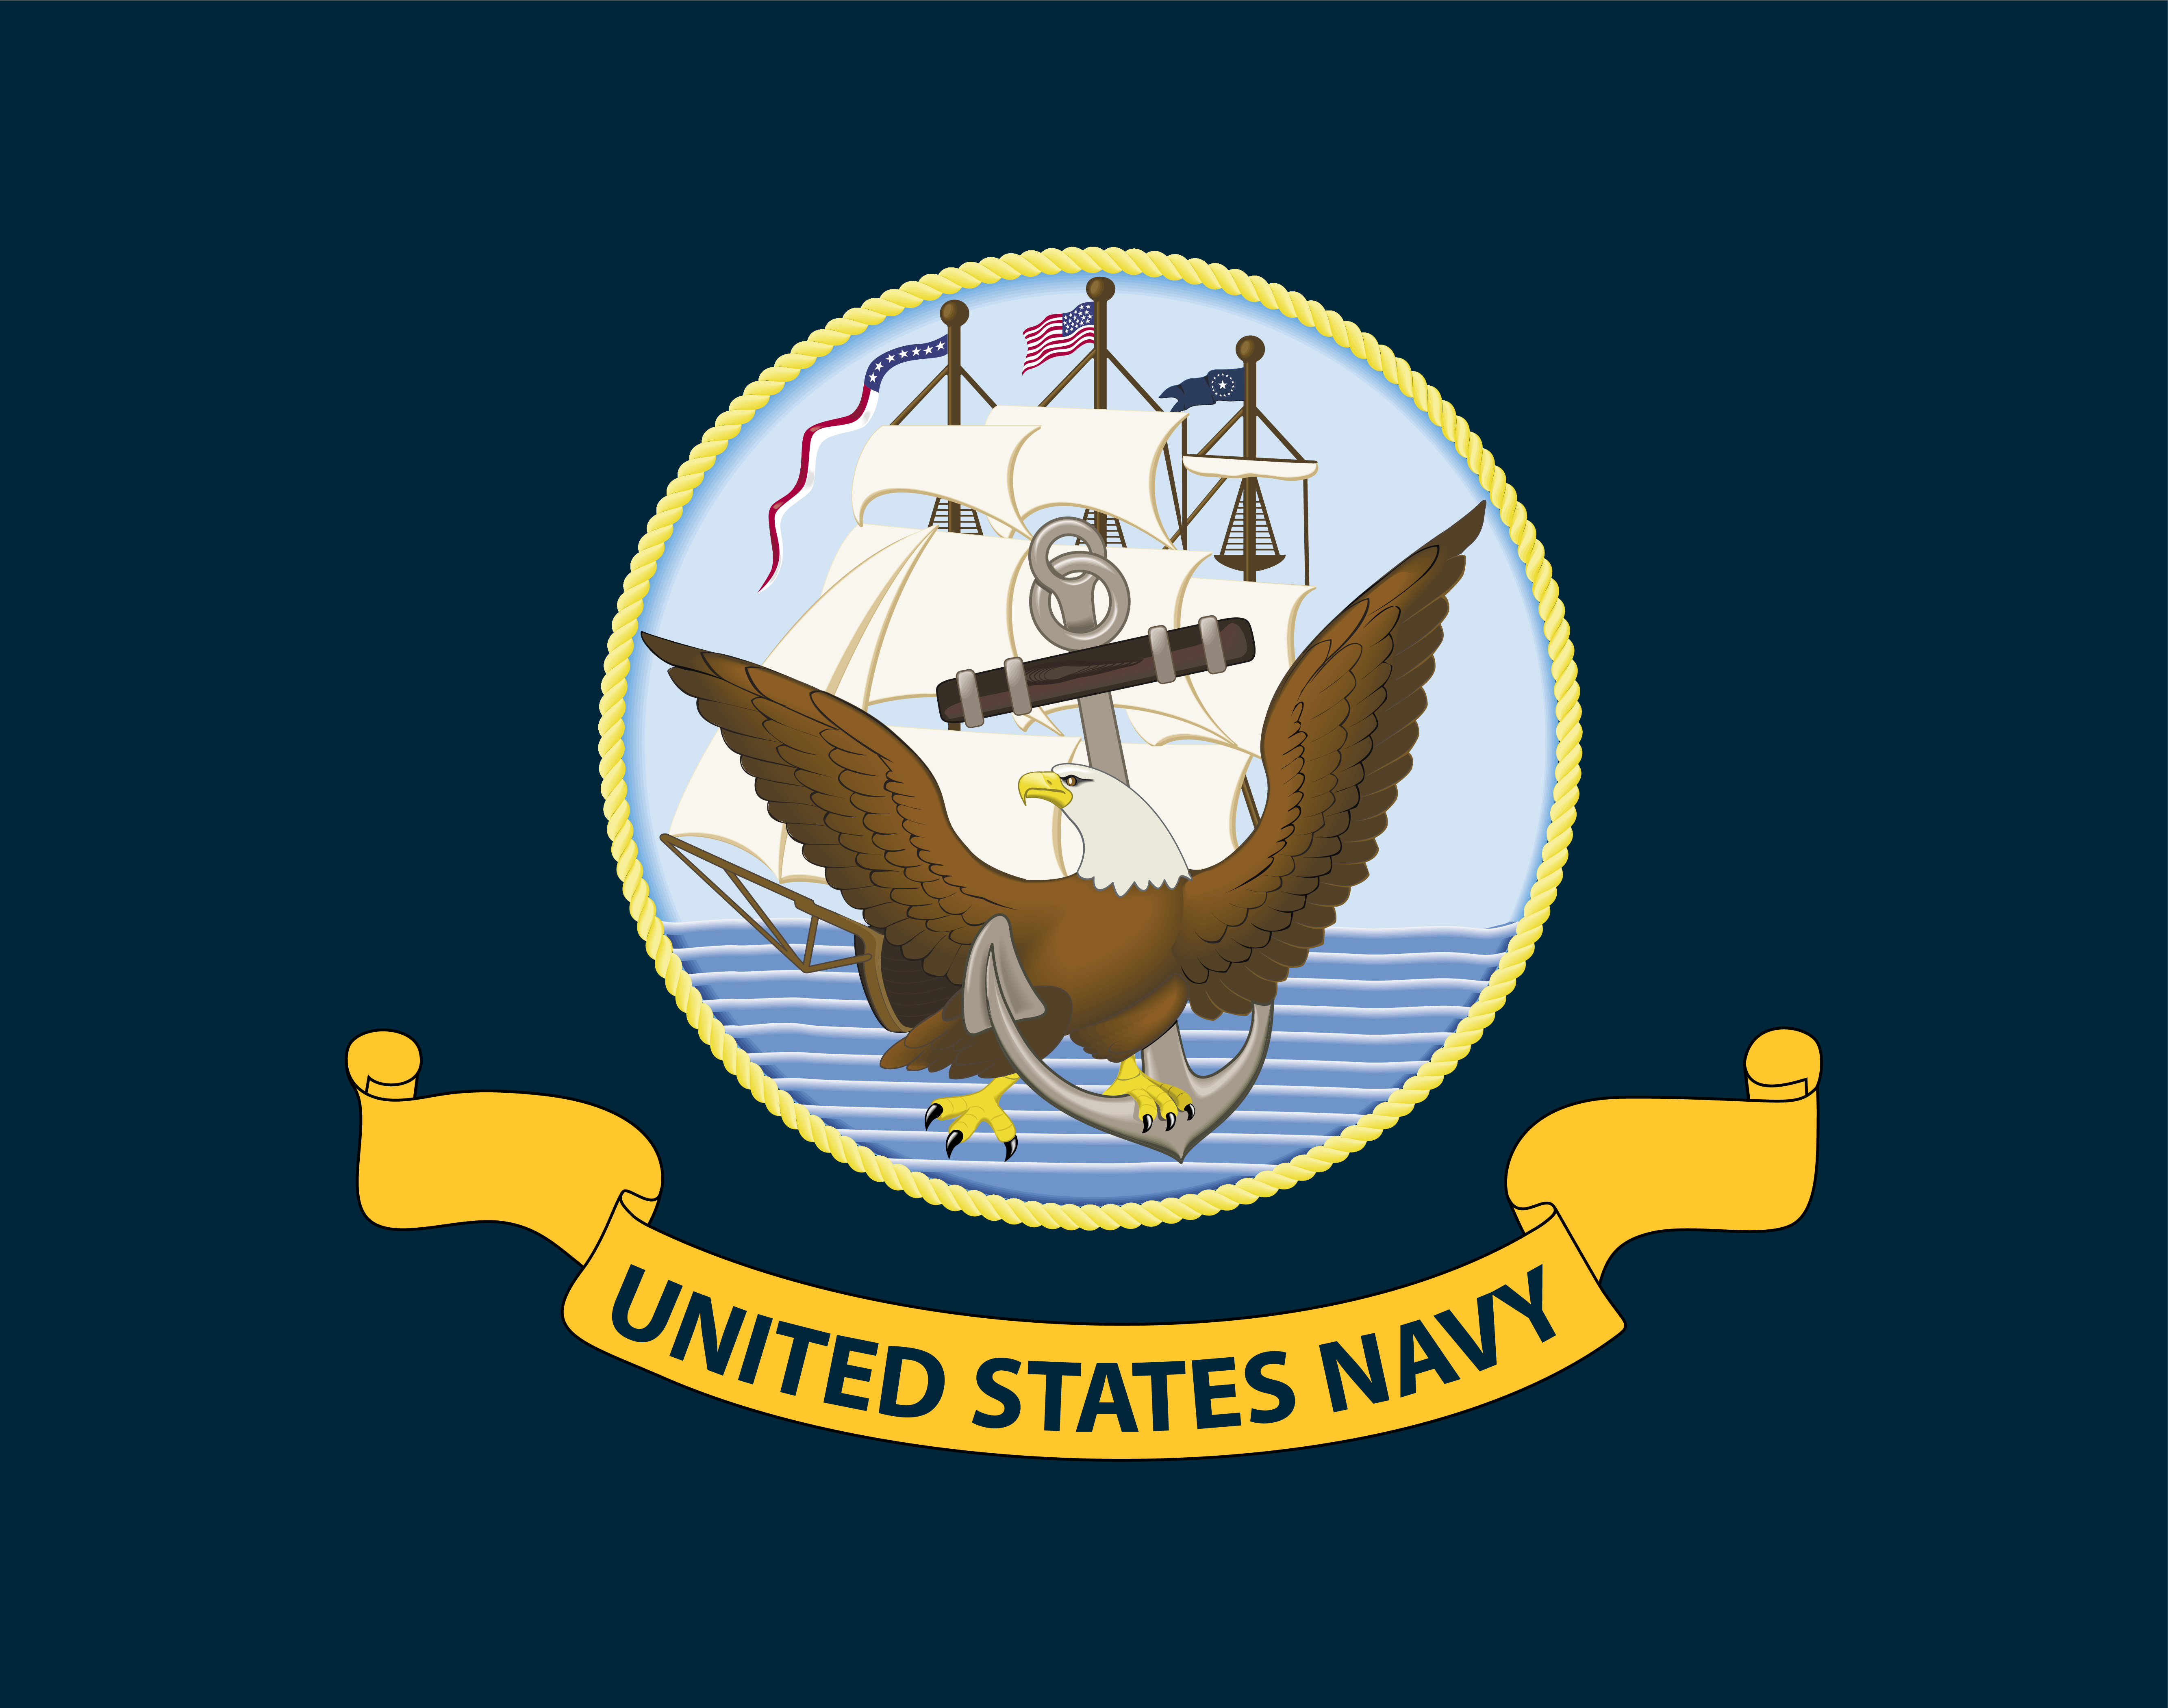 5' x 3' US Navy Chiefs Flag USA United States Naval American Military Banner